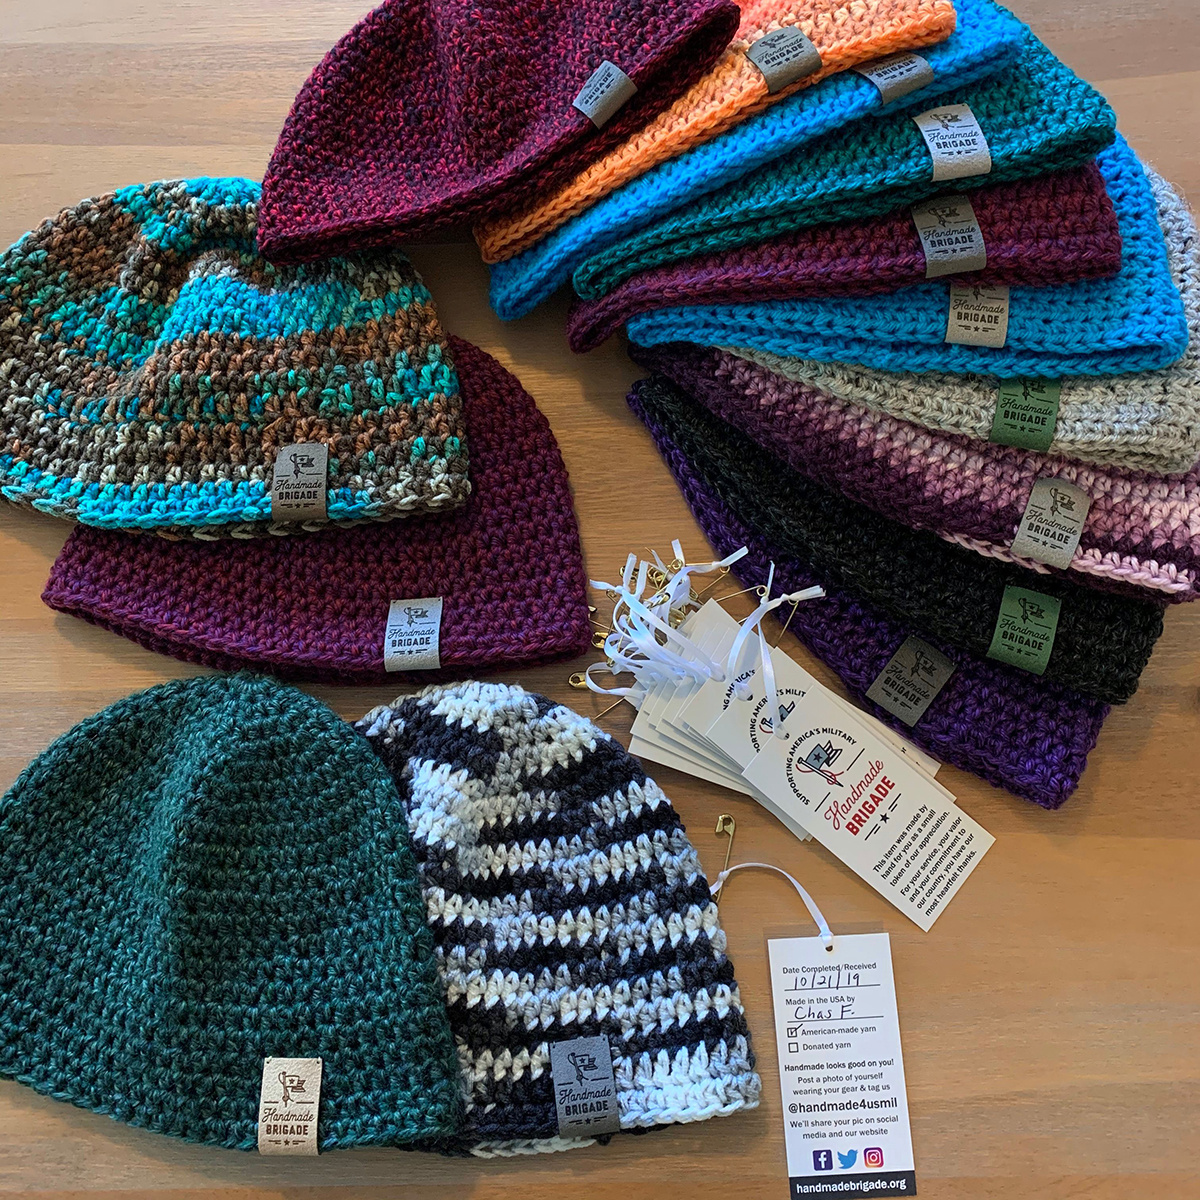 Knitted hats by Handmade Brigade with hang tags